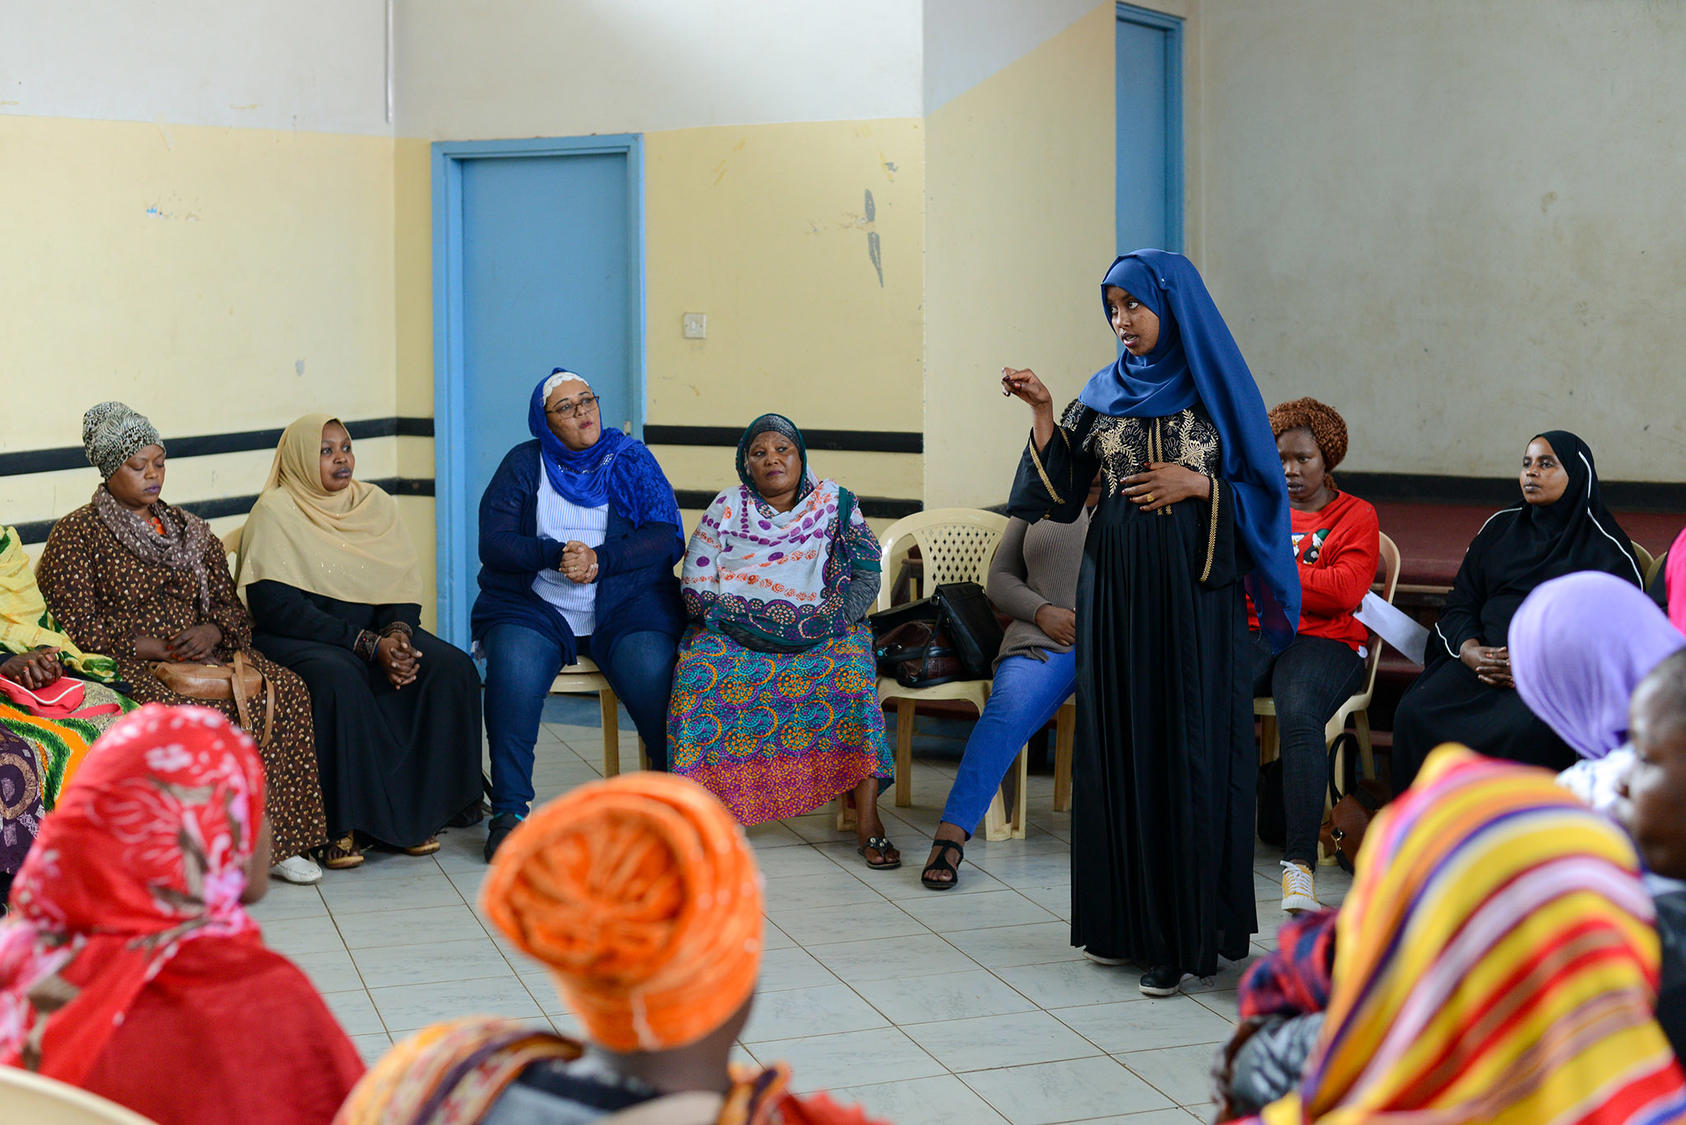 A June 2019 dialogue on preventing extremism in the Eastleigh community of Nairobi, Kenya, organized by the Sisters Without Borders network, USIP's partner for the Women Preventing Violent Extremism–Horn of Africa project. (Steven Ruder/USIP)